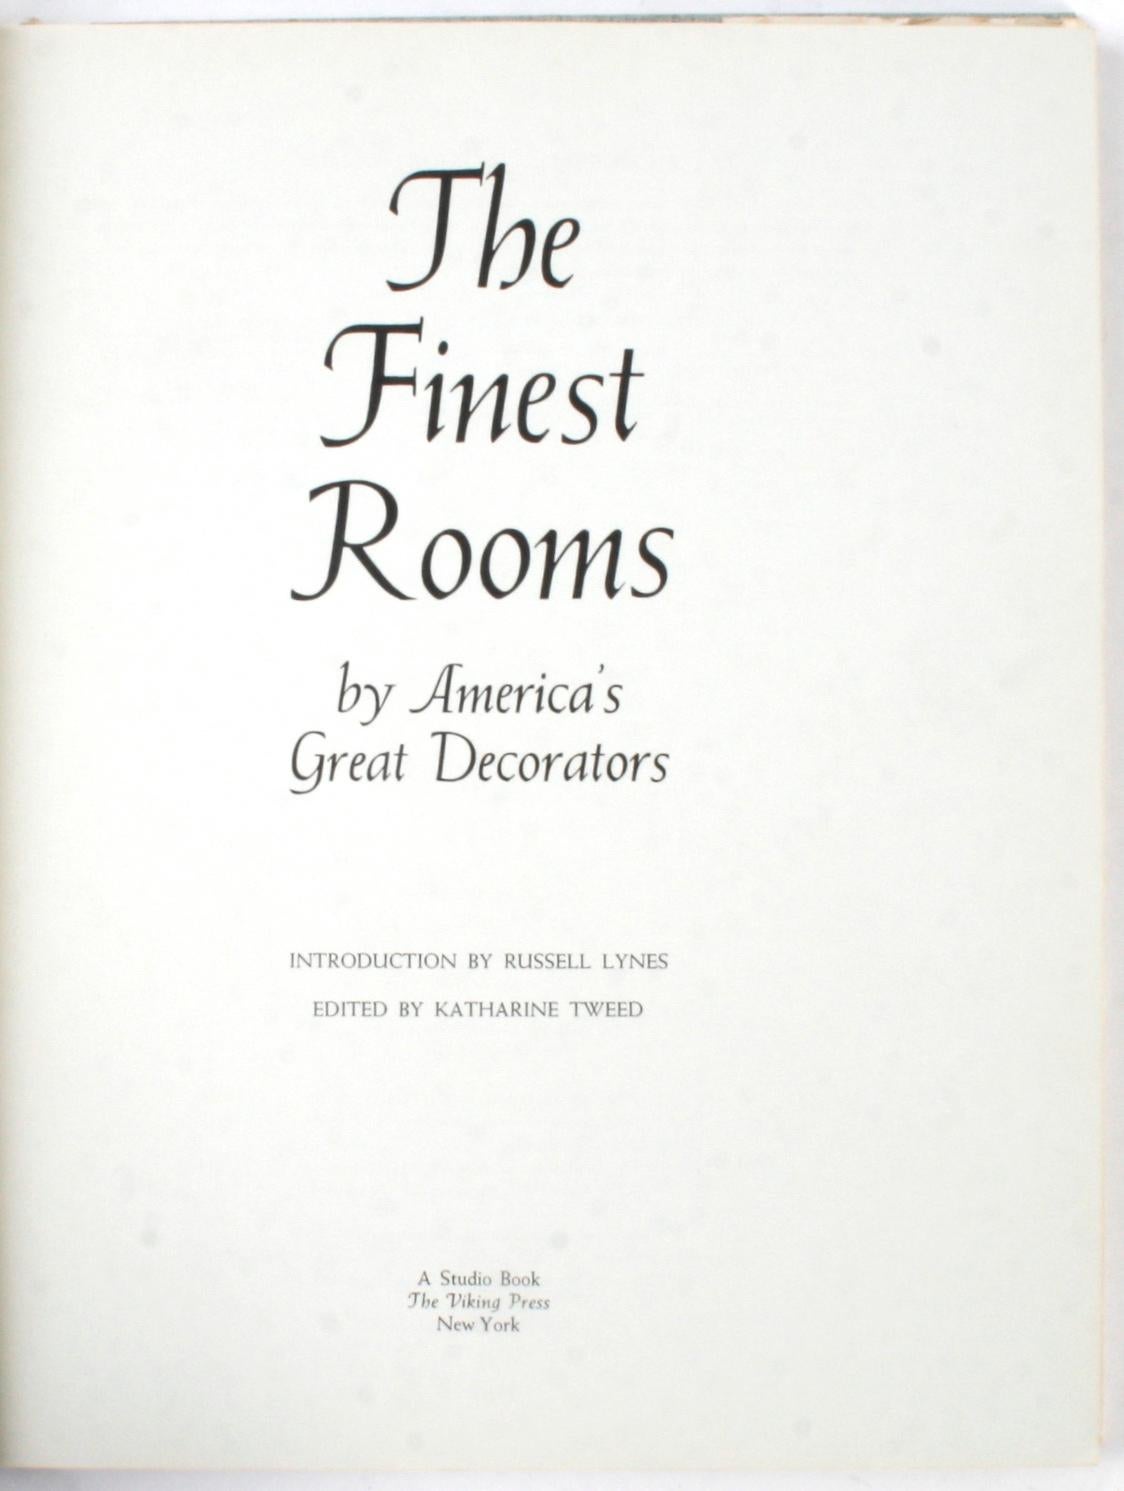 The Finest Rooms by America's Great Decorators. New York: The Viking Press, 1964. First edition hardcover with dust jacket. 168 pp. Vintage decorating by some of Americas famous decorators including: Sister Parish, Micheal Taylor, Billy Baldwin,